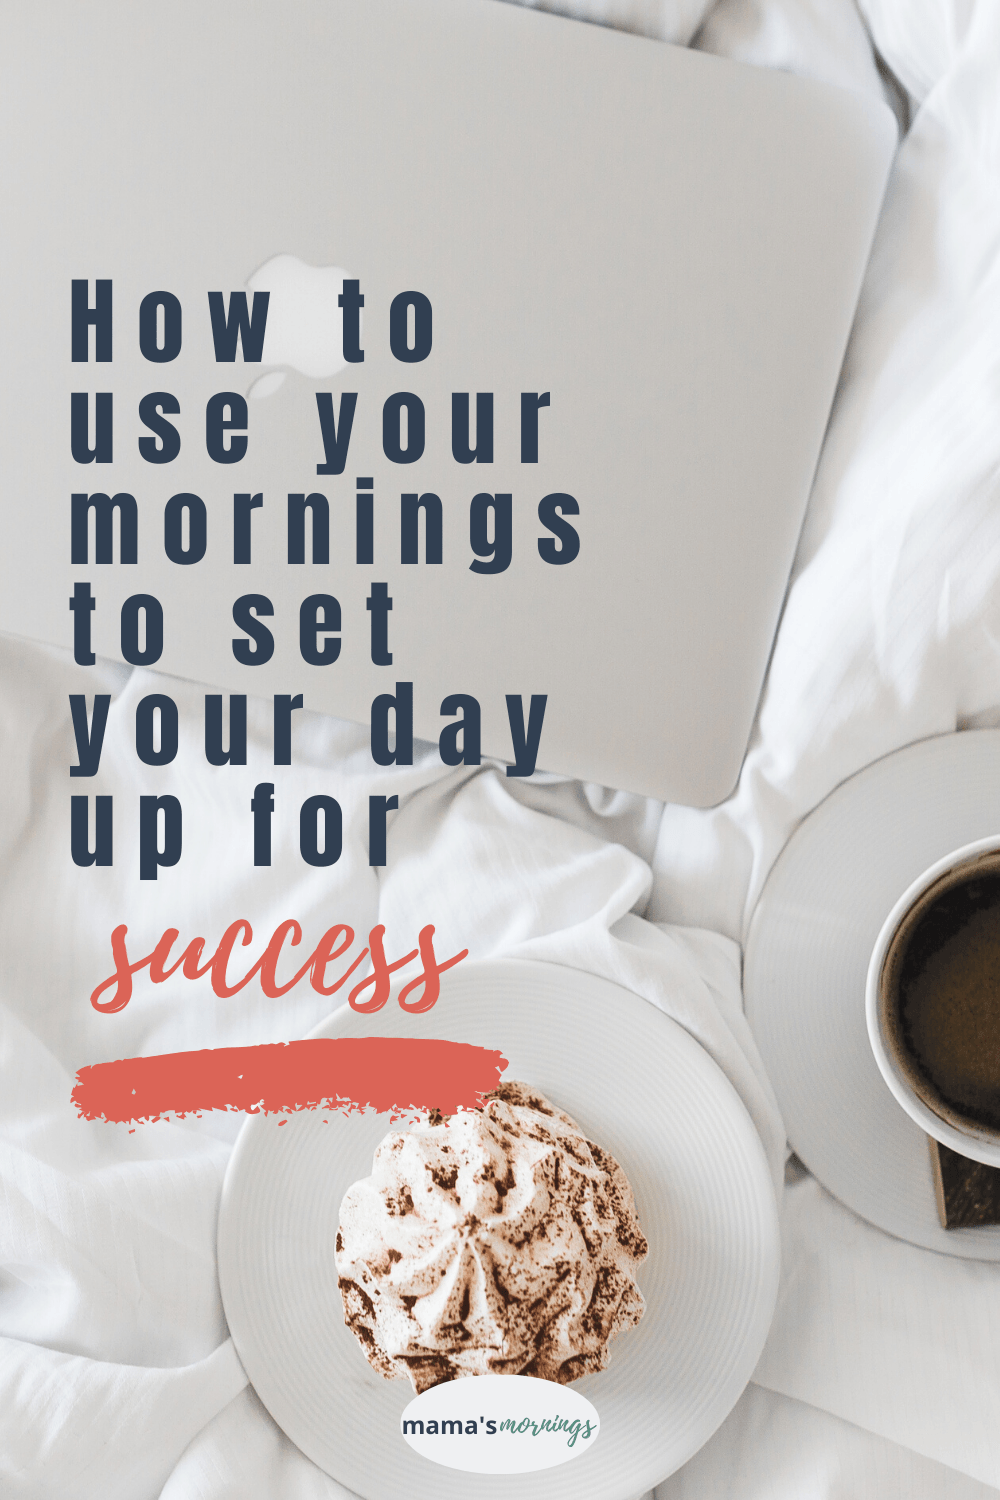 5 Things Every Mom Should Do Every Morning